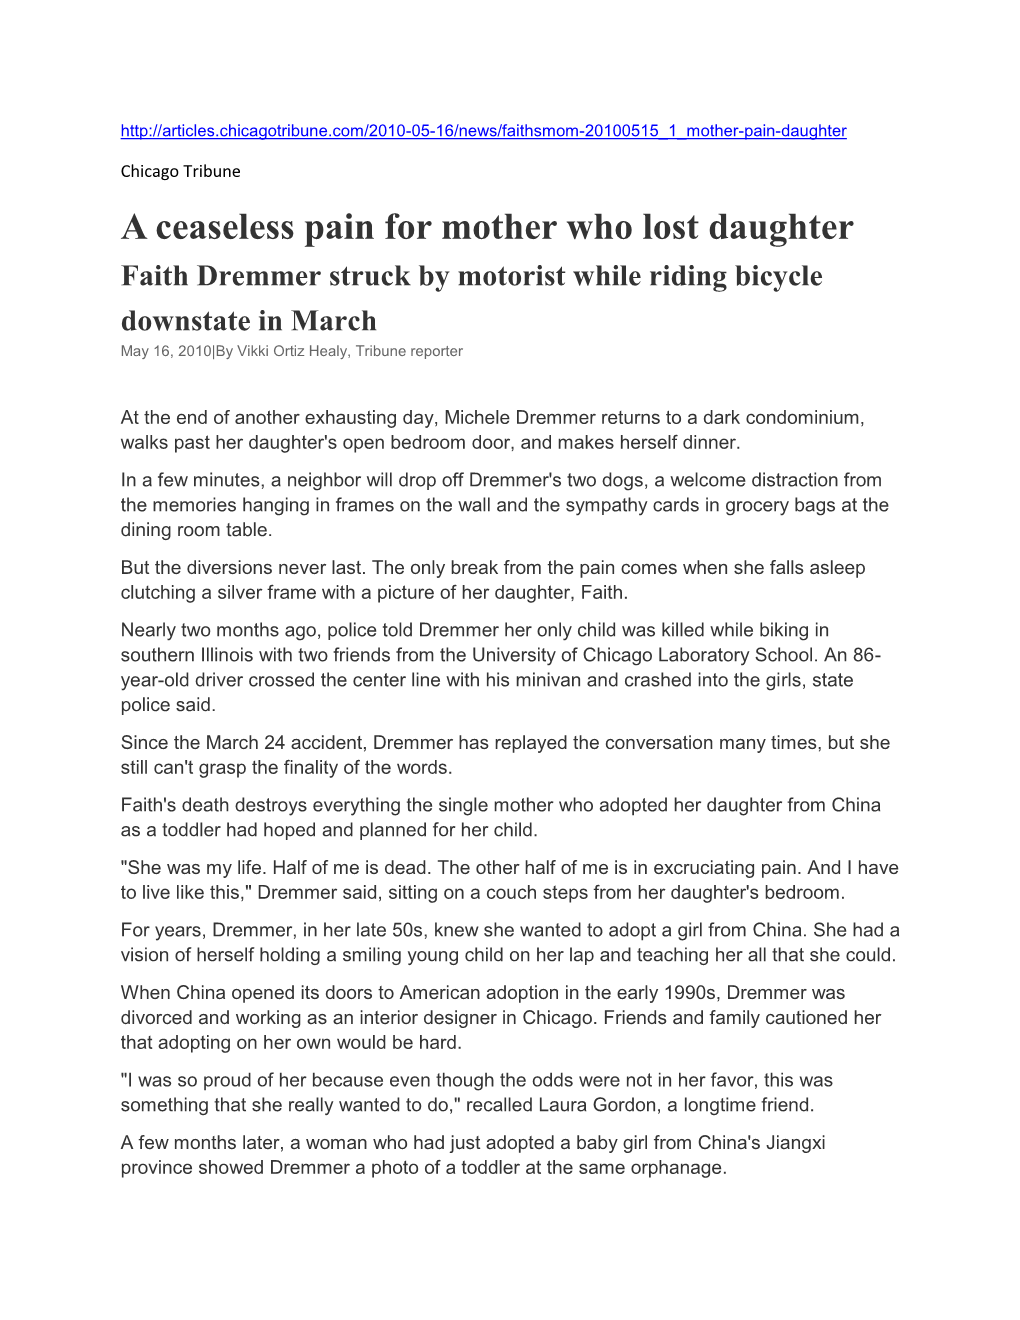 A Ceaseless Pain for Mother Who Lost Daughter